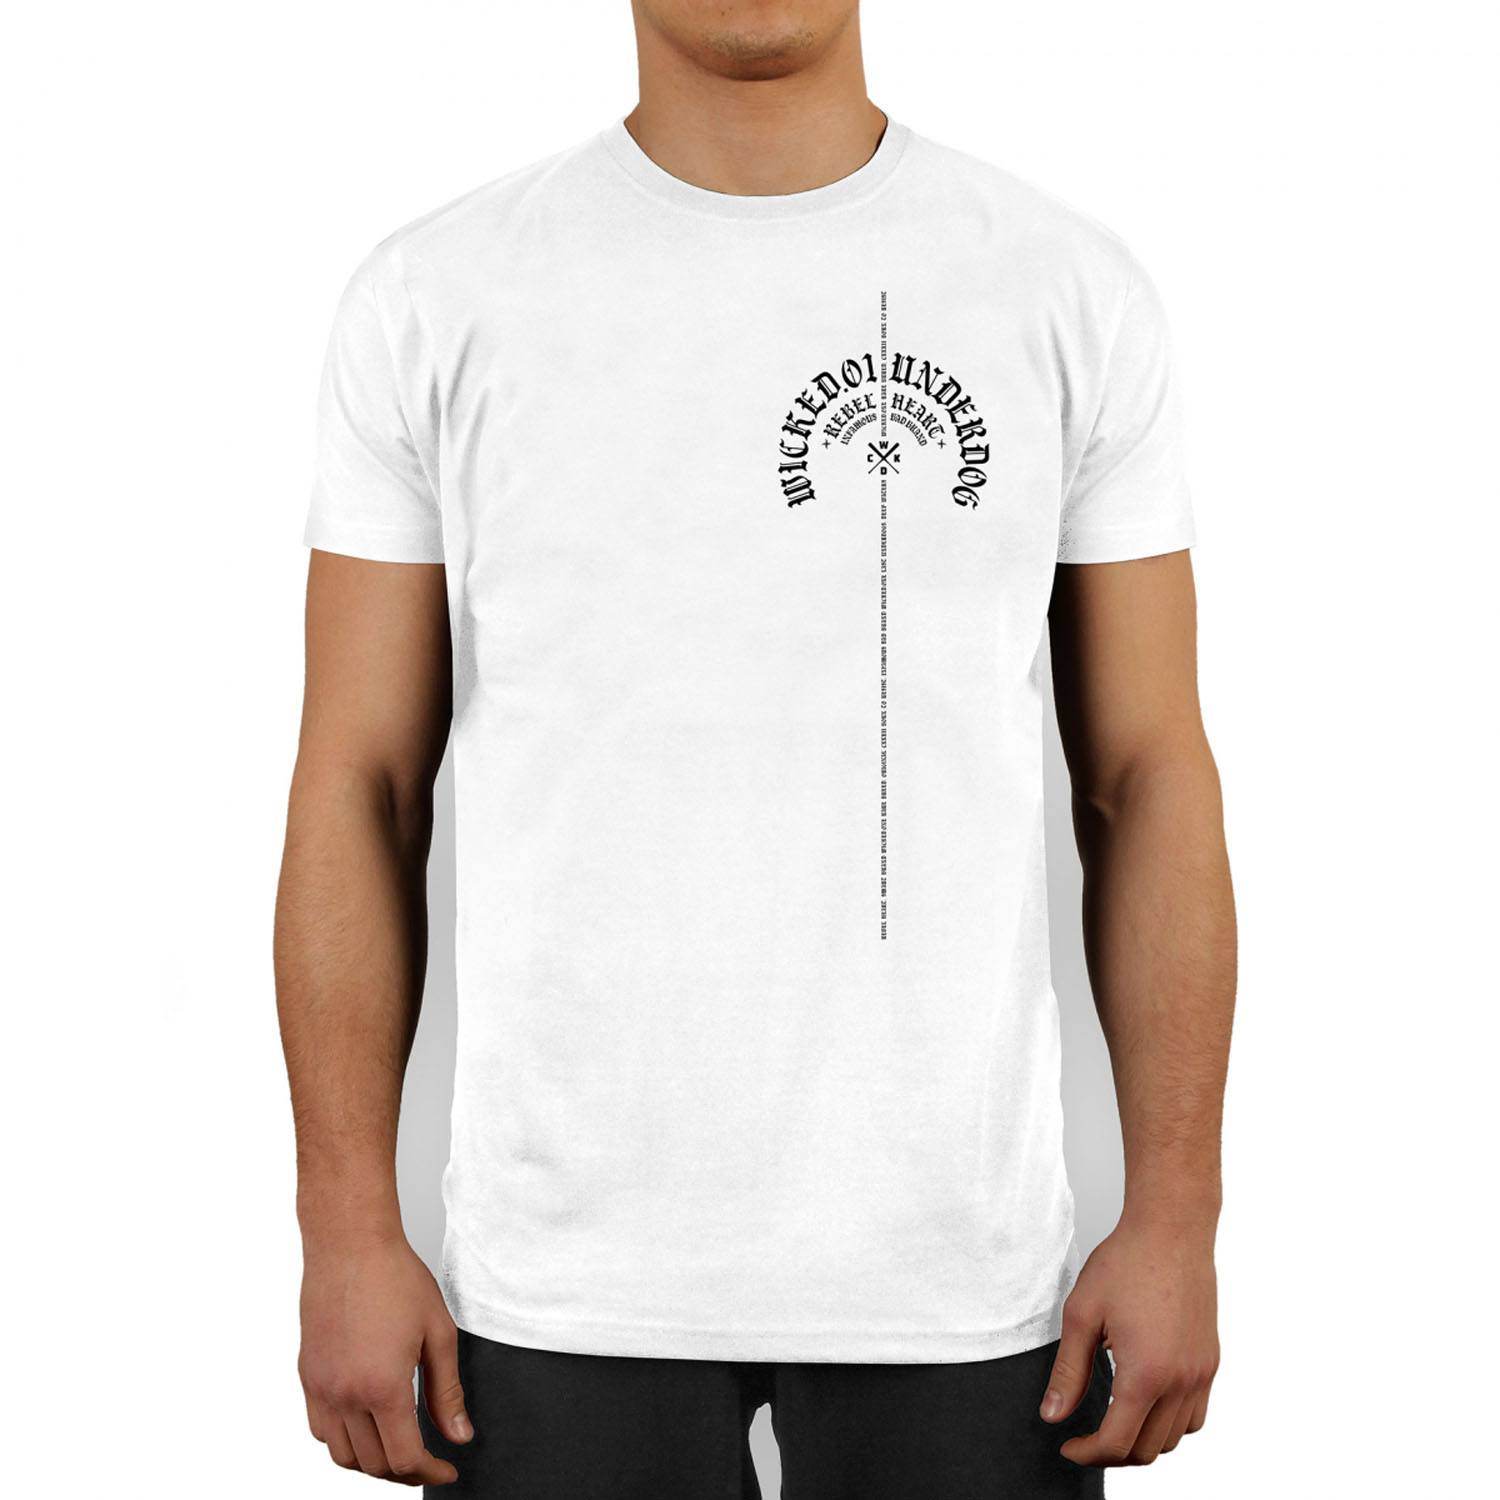 Wicked One T-Shirt, Chains, white, M